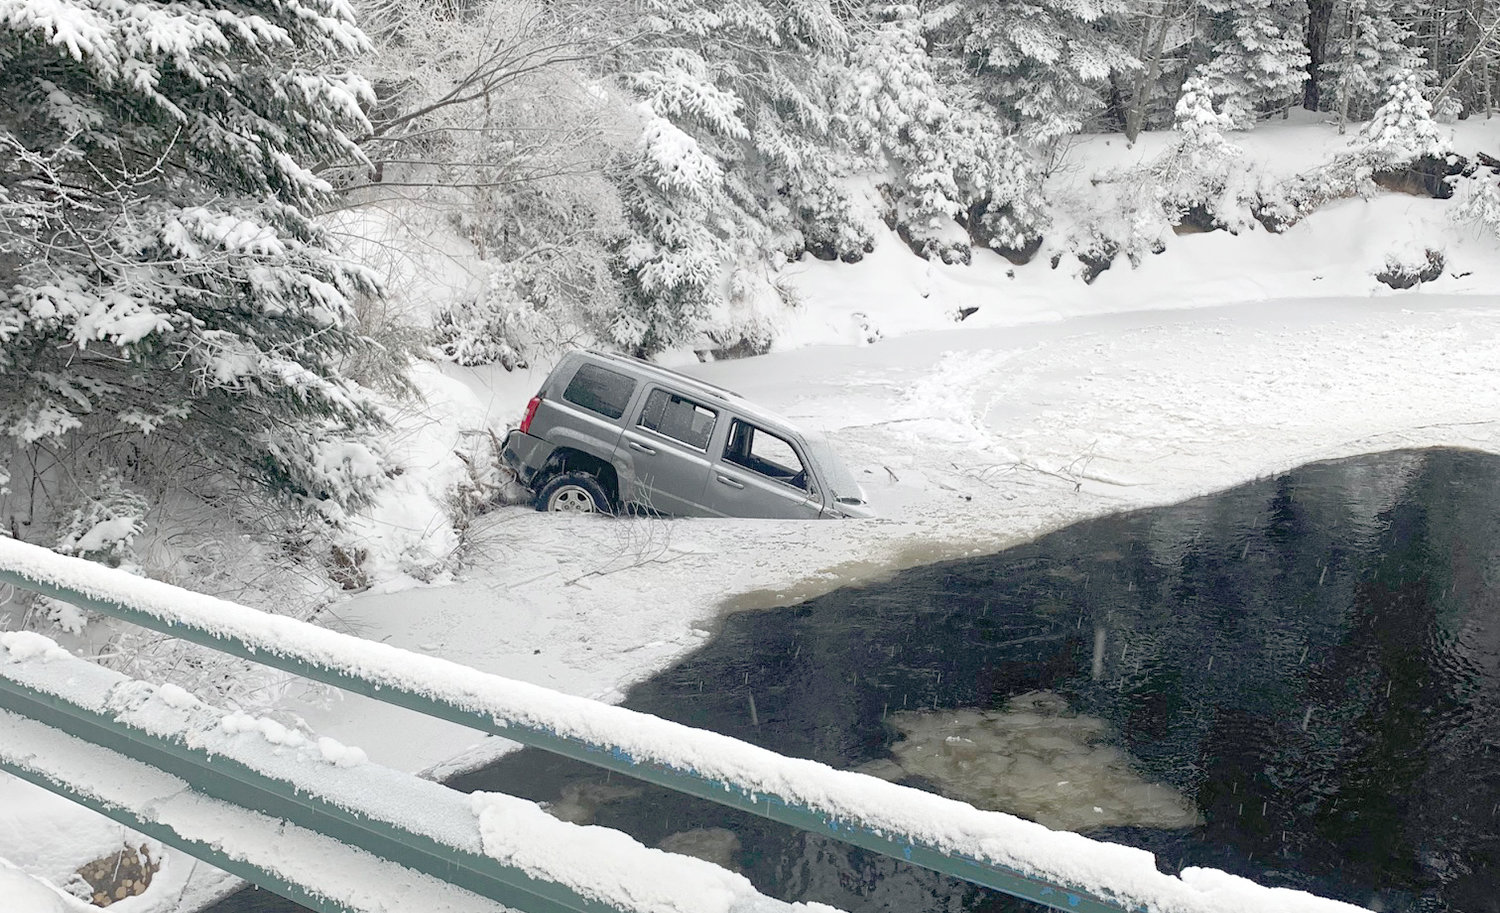 Three people were able to escape after this Jeep crashed into the Moose River in the Town of Webb at about 2 a.m. Sunday, according to the Webb Police Department.